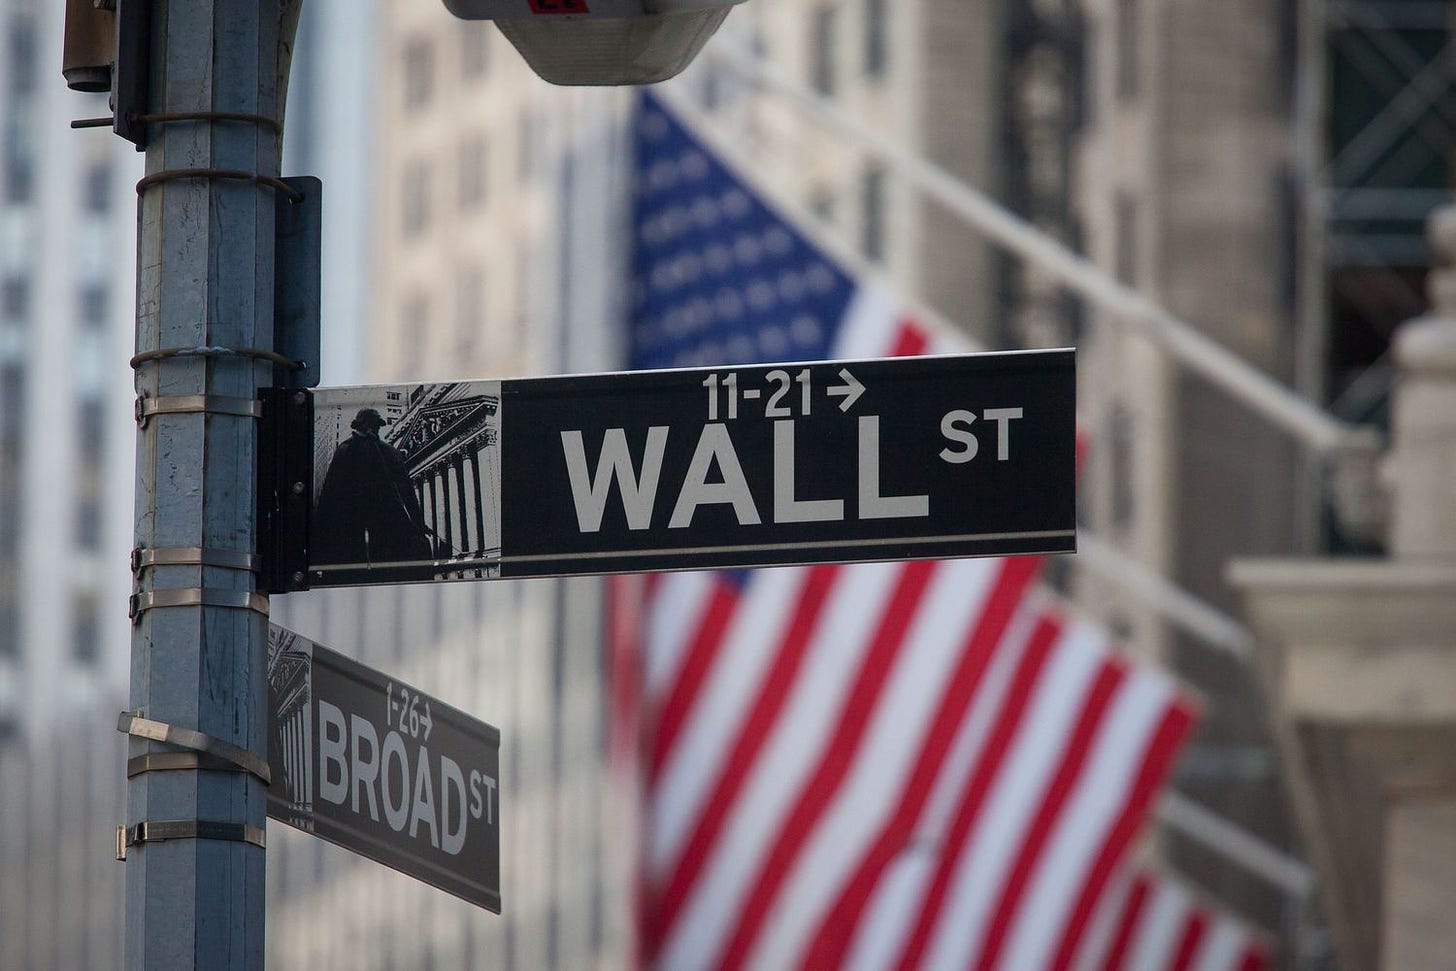 Wall Street: Location, History, and How It Works